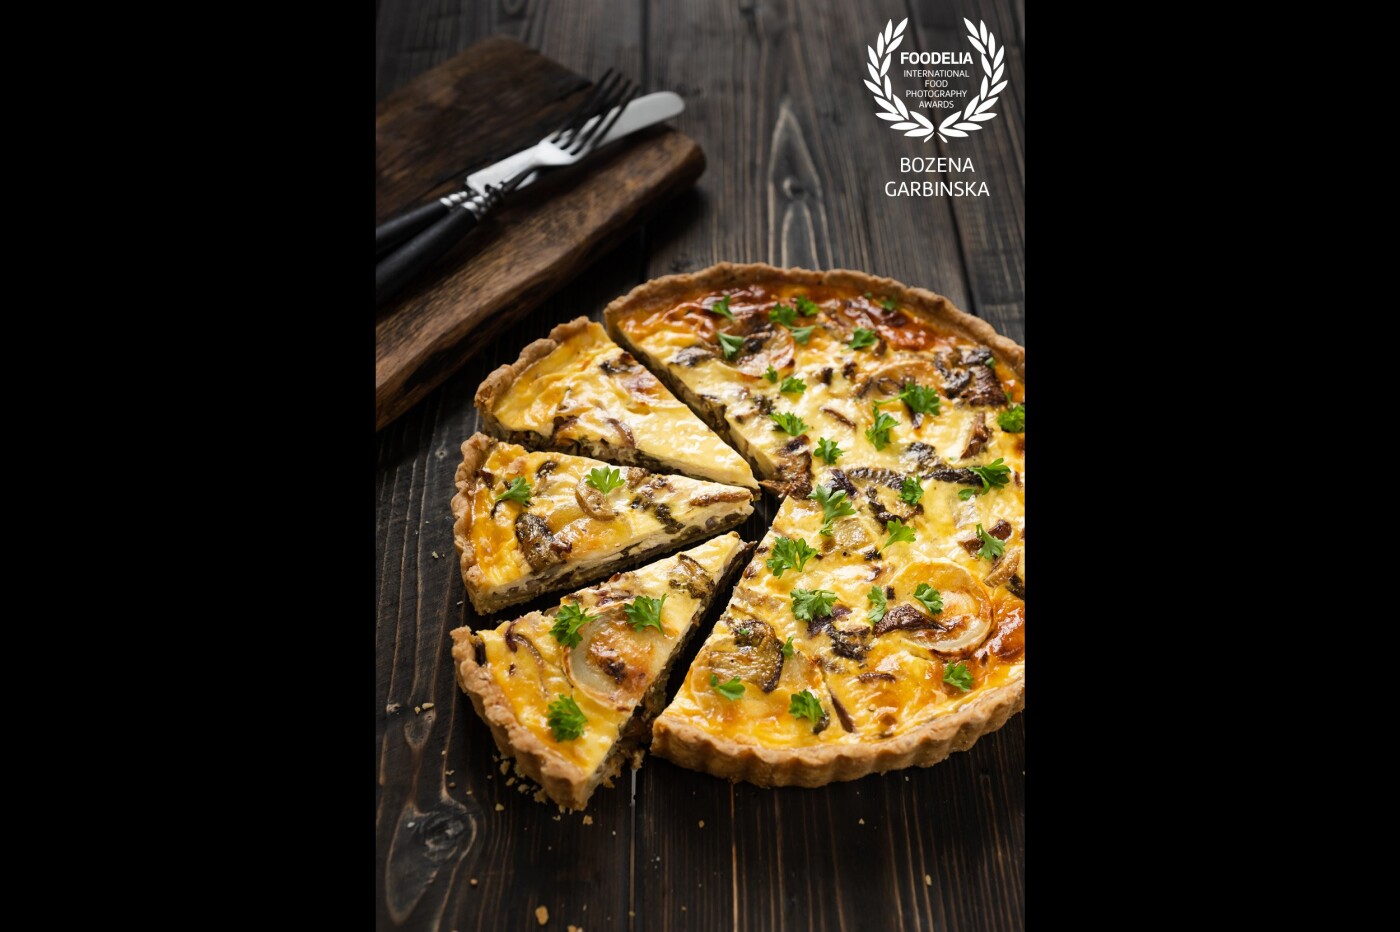 Mushroom tart with goats cheese. Autumn - the best time for mushrooms<br />
Camera: Fuji X-T3<br />
Lens: Fujinon 16-55 mm<br />
Settings: ISO 250, 32.1 mm, 1/7 s, f/4.5<br />
Shot using natural light.